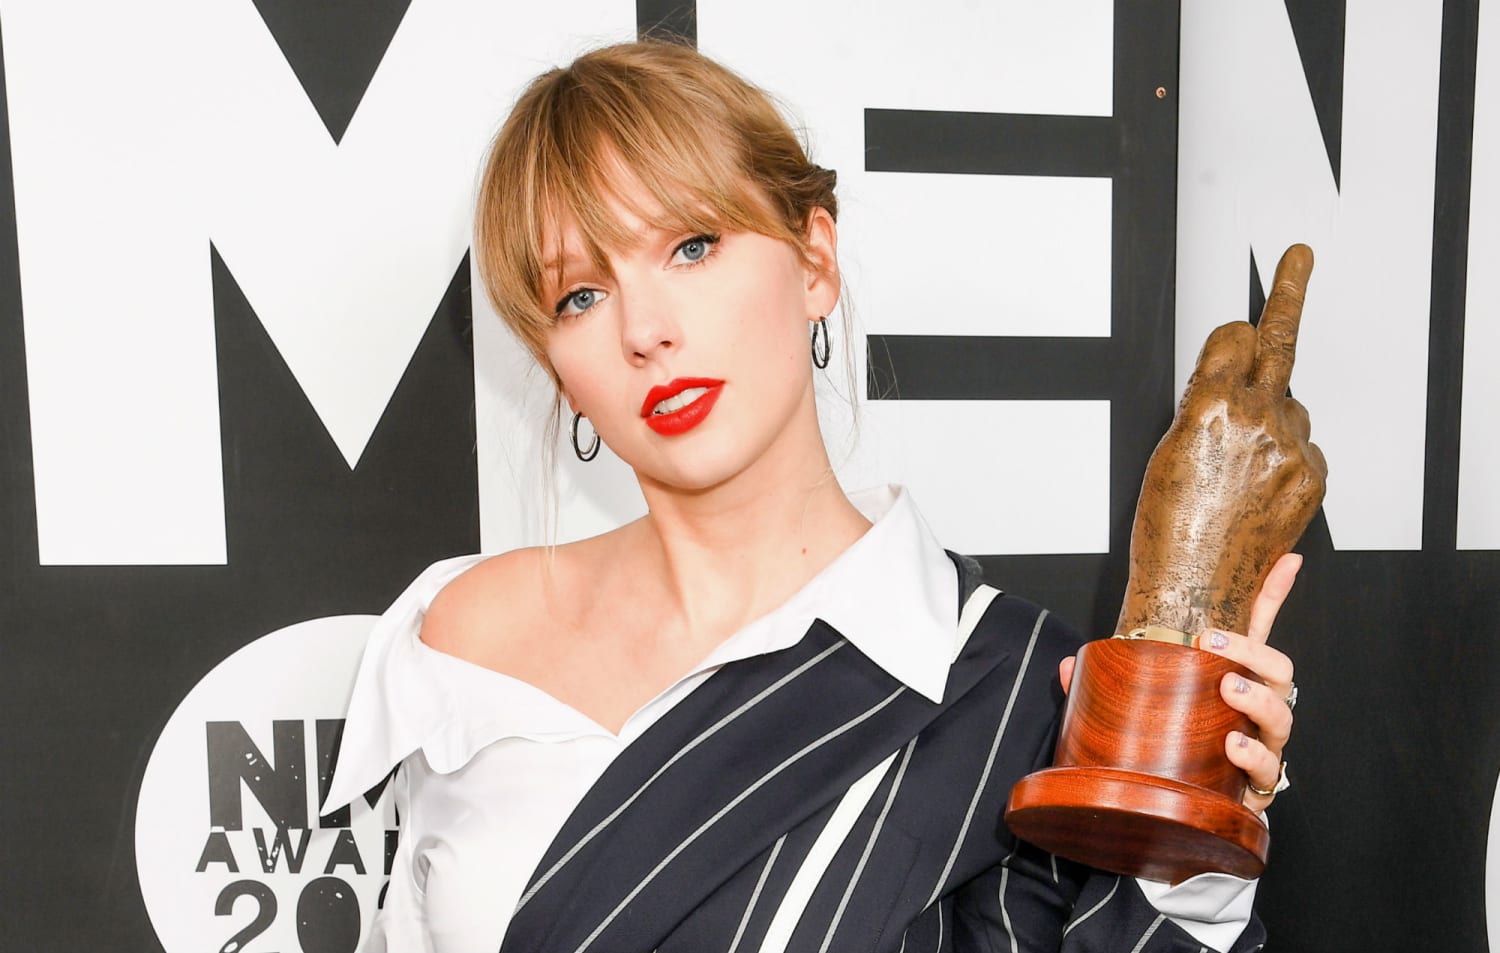 Taylor Swift says re-recording old music is "an amazing adventure"